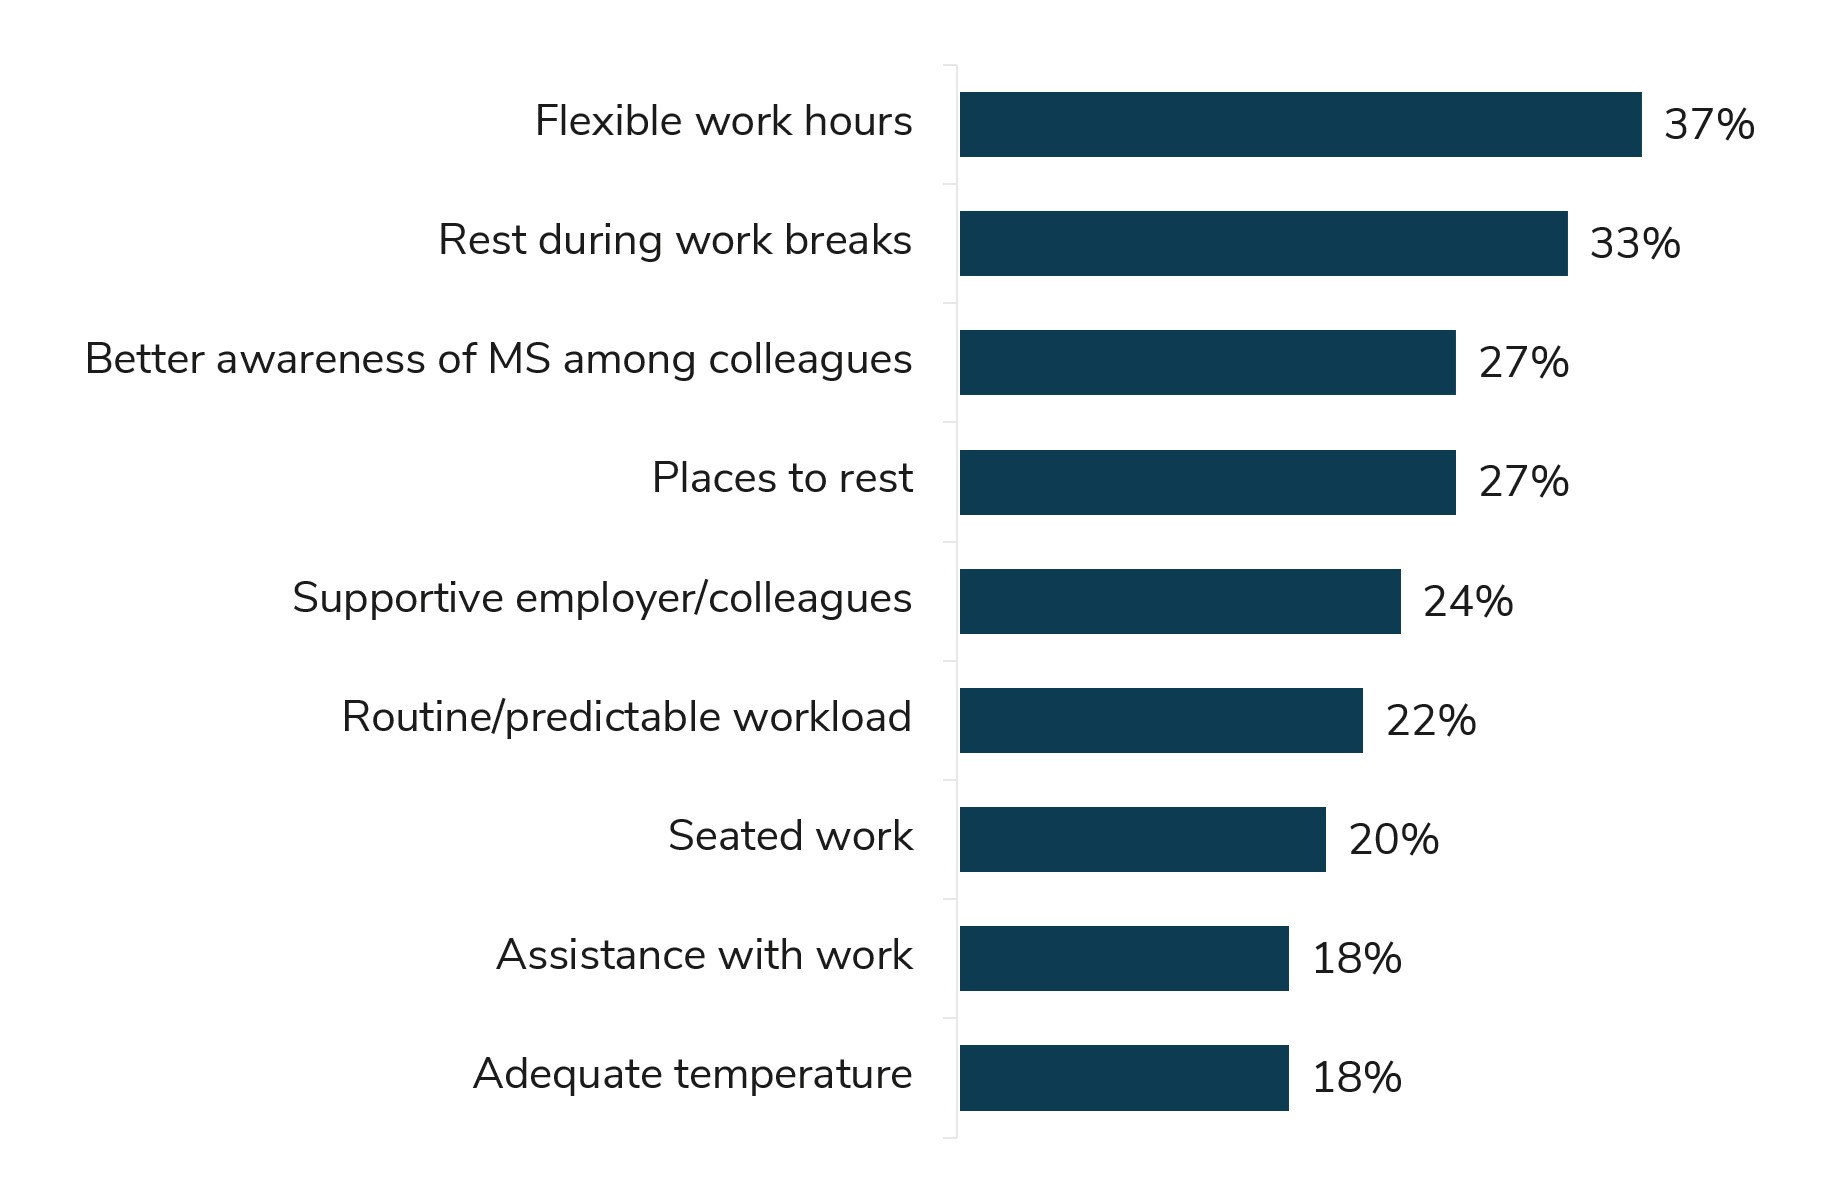 Factors that would enable people with MS to stay in work. Flexible working hours (37%) Rest during work breaks (33%) Better awareness of MS among colleagues (27%) Places to rest (27%) Supportive employer/ colleagues (24%) Routine/predictable workload (22%) Seated work (20%) Assistance with work (18%) Adequate temperature (18%)